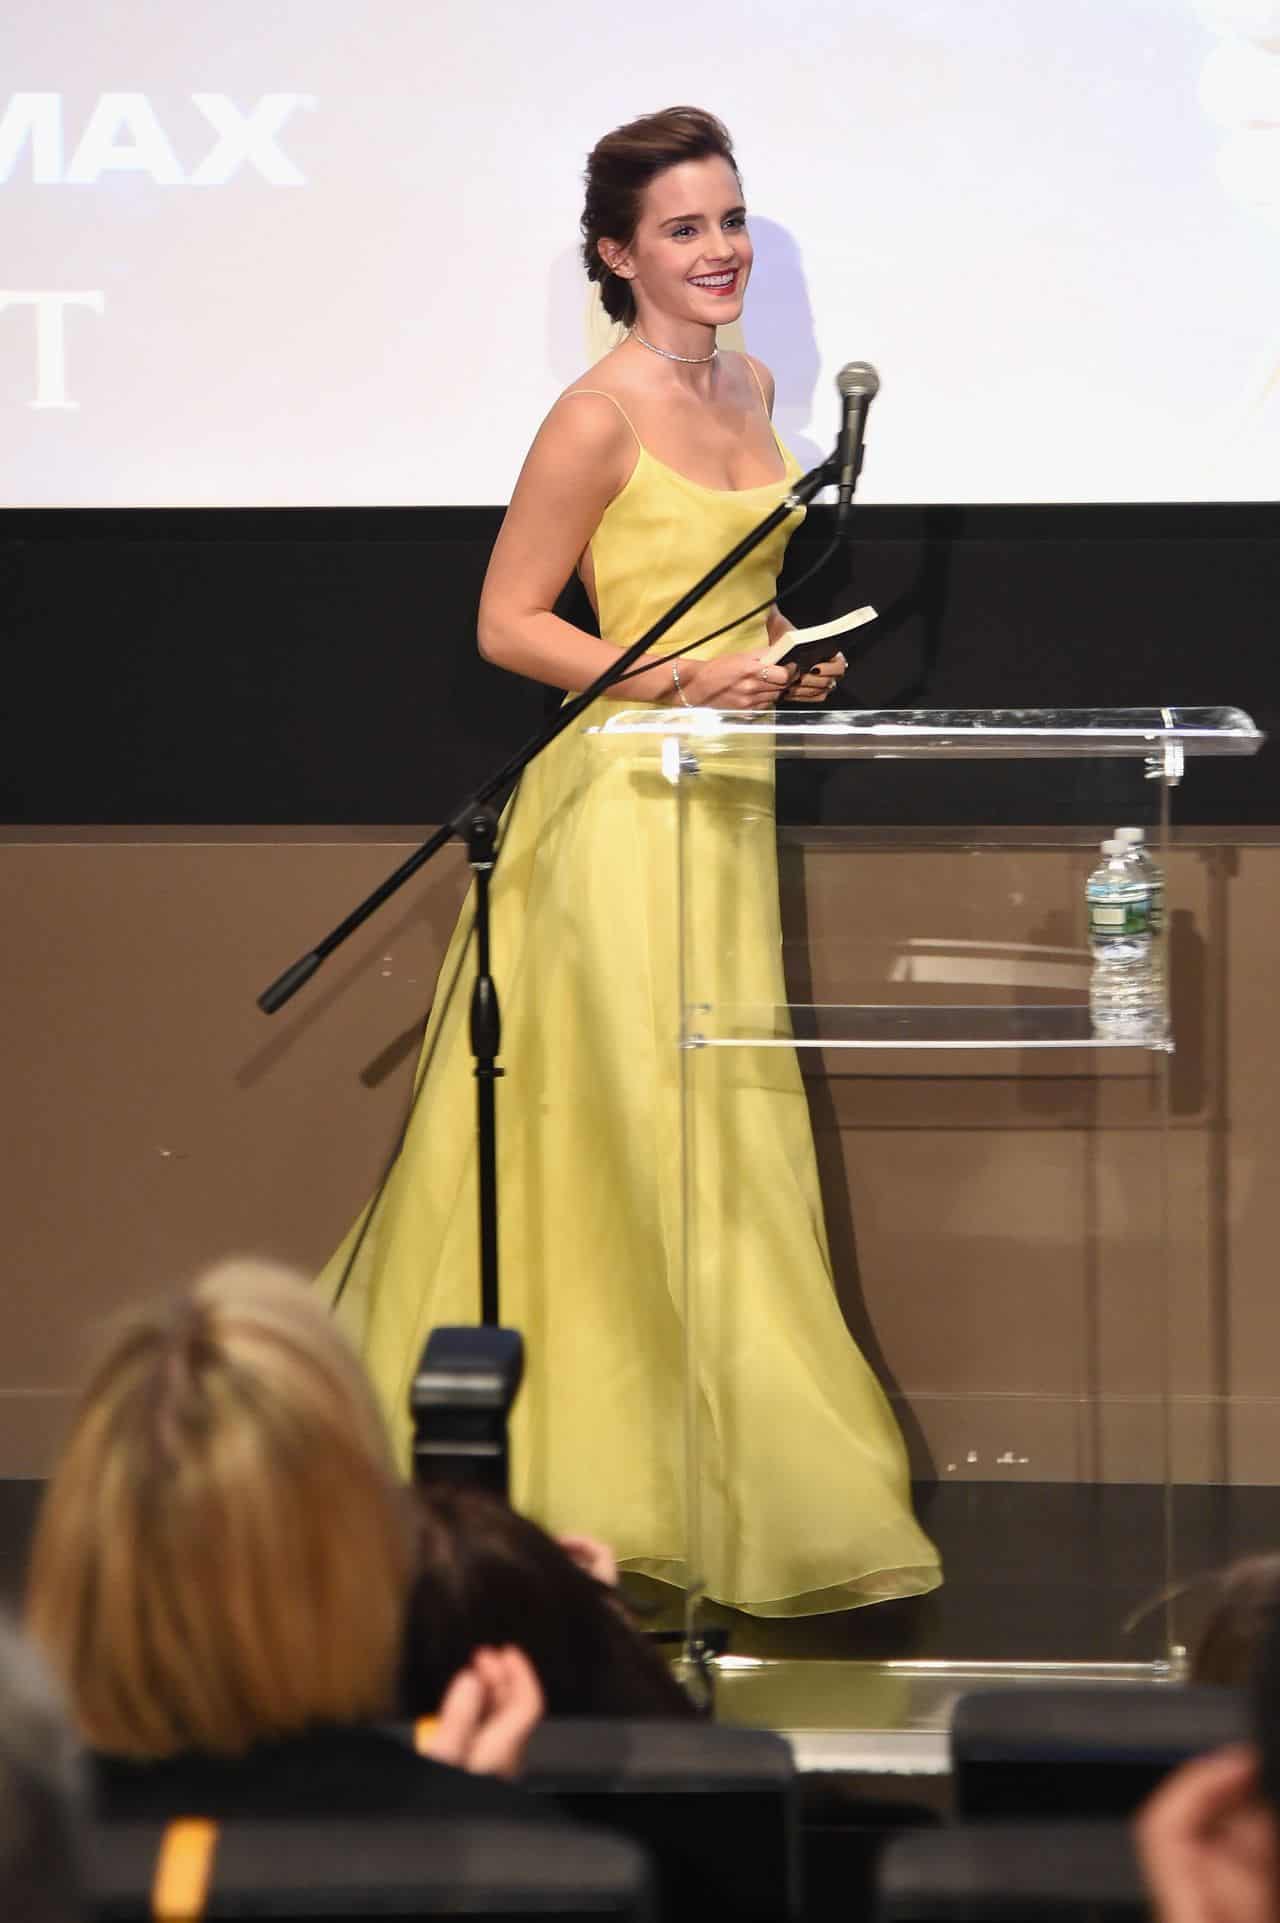 Emma Watson Stuns in a Yellow Dress at the NYICFF at Lincoln Center in NYC